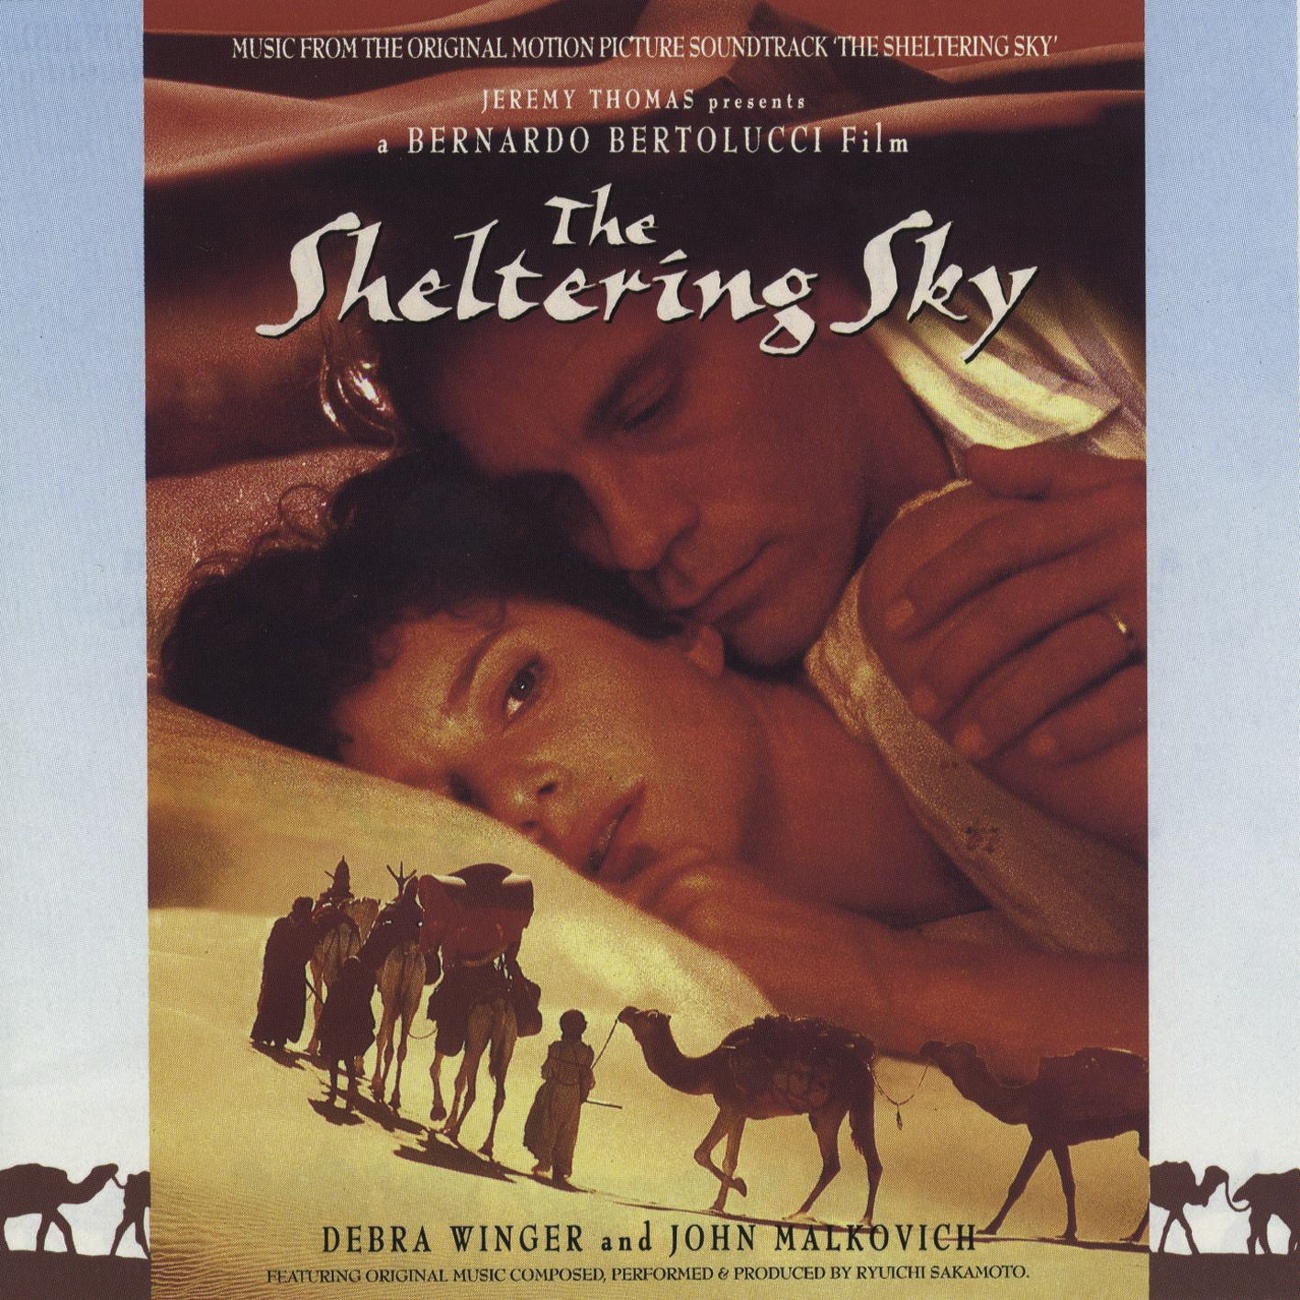 The Sheltering Sky Theme (Piano Version)